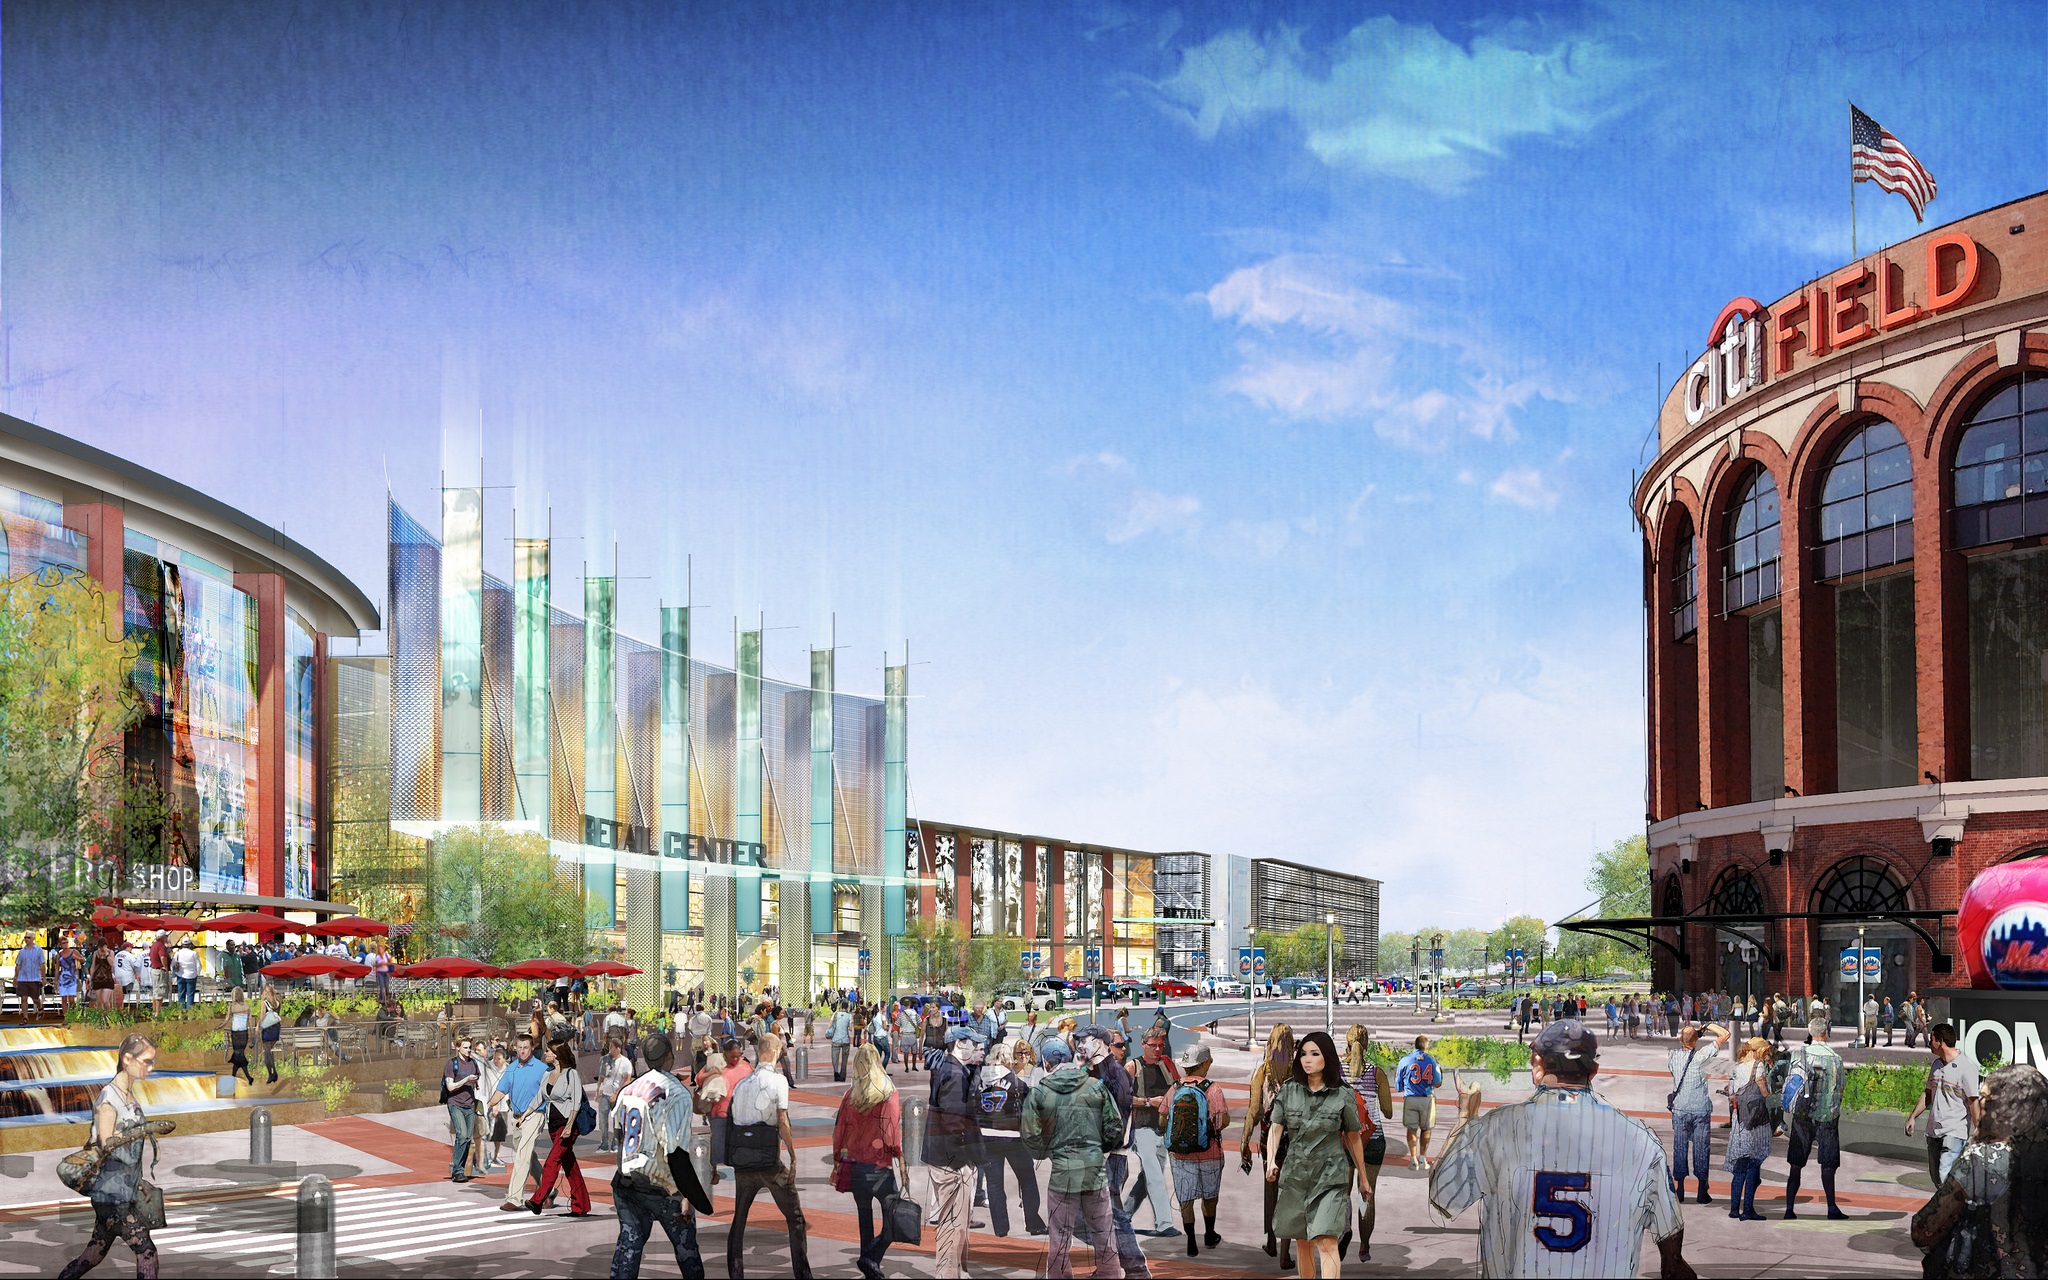 The Willets Point redevelopment plan calls for eventually constructing housing units and a mega mall near Citi Field.